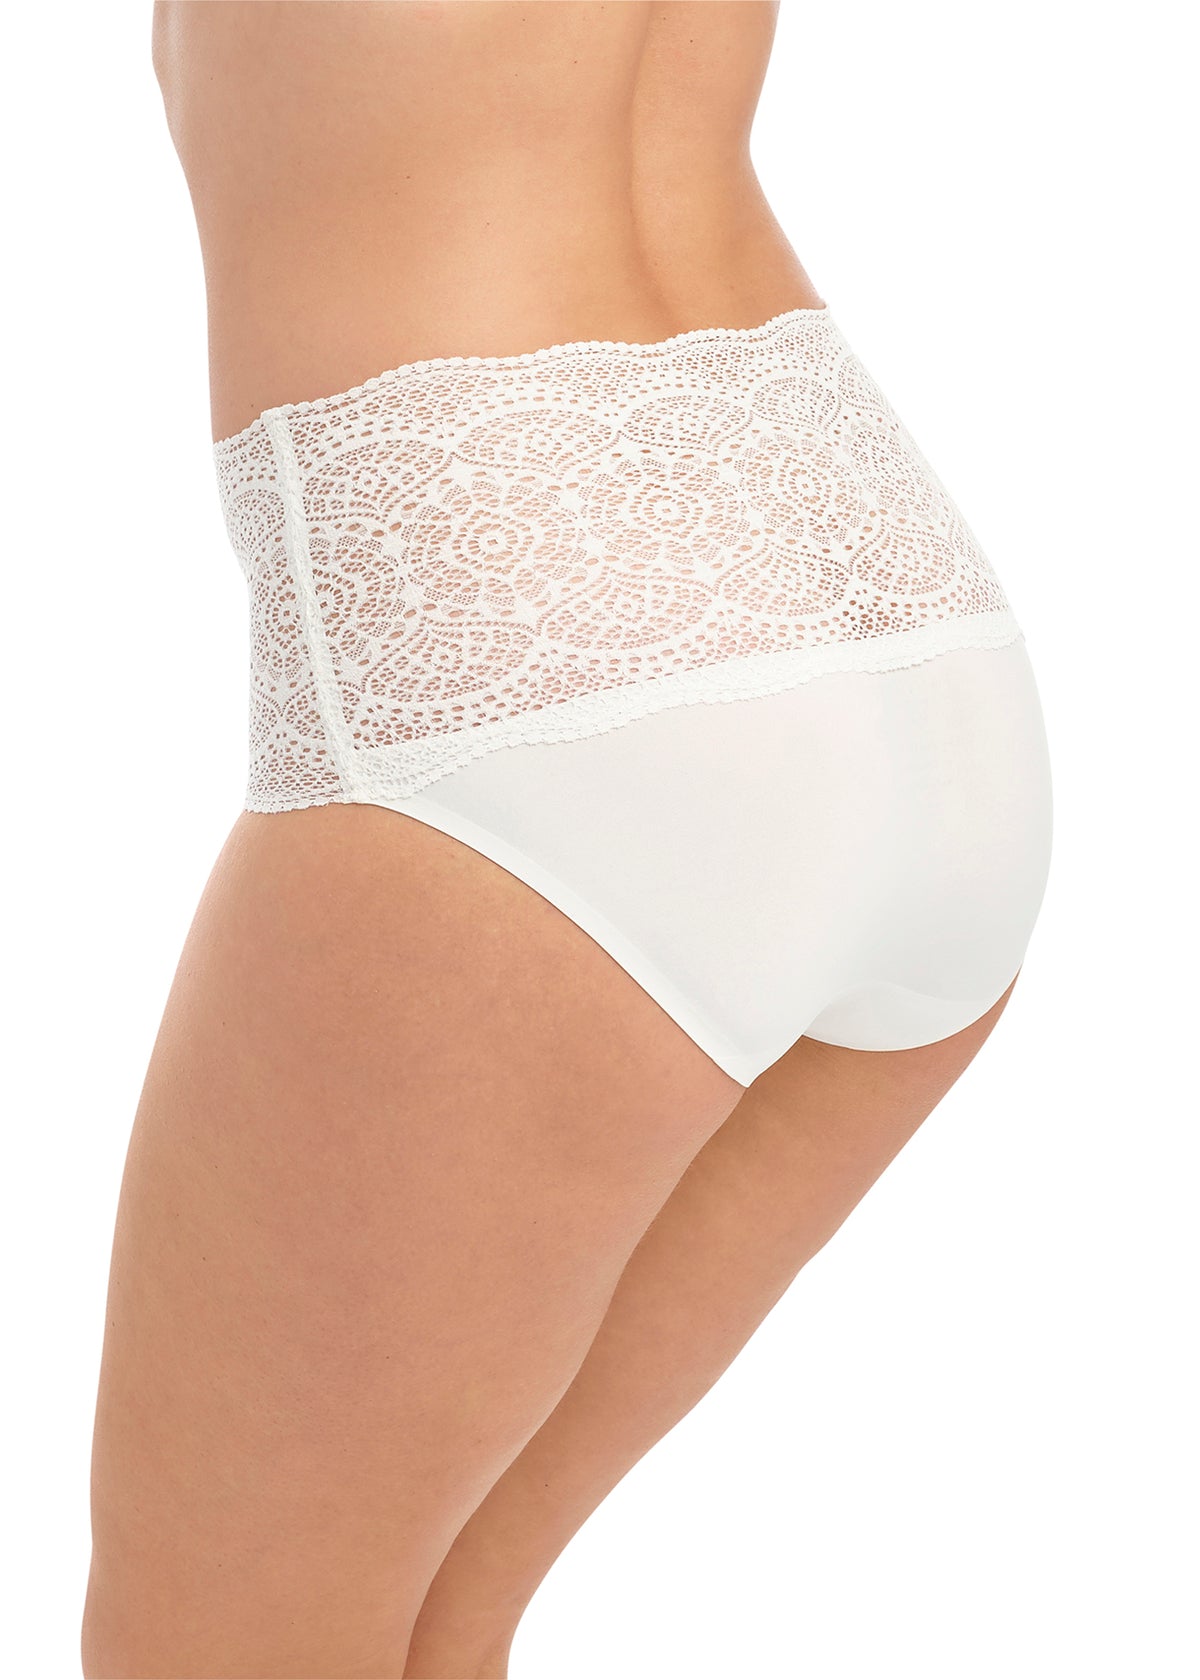 Fantasie Lace Ease Smooth Stretch Lace Ivory Briefs